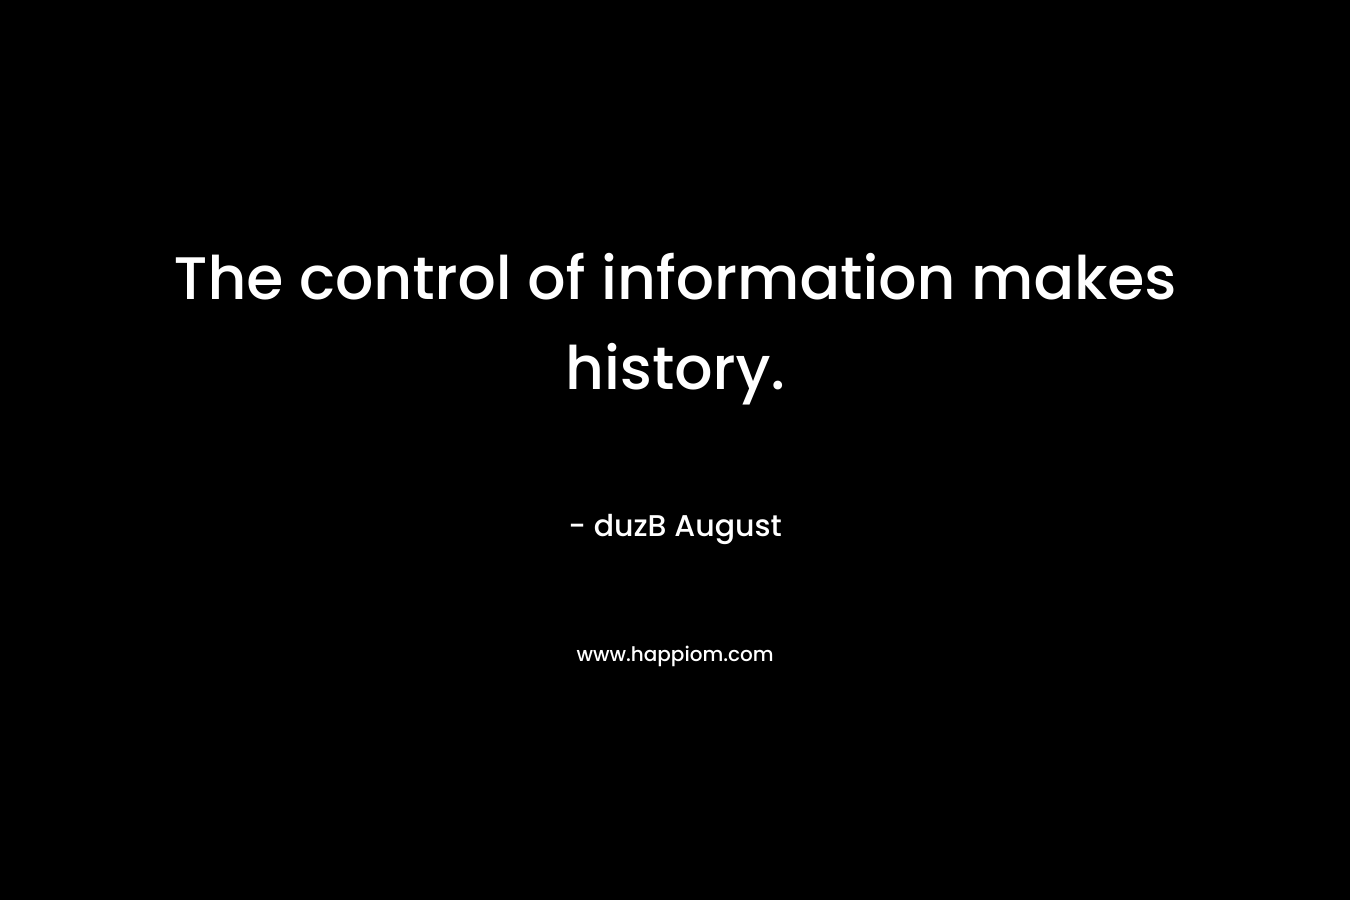 The control of information makes history.